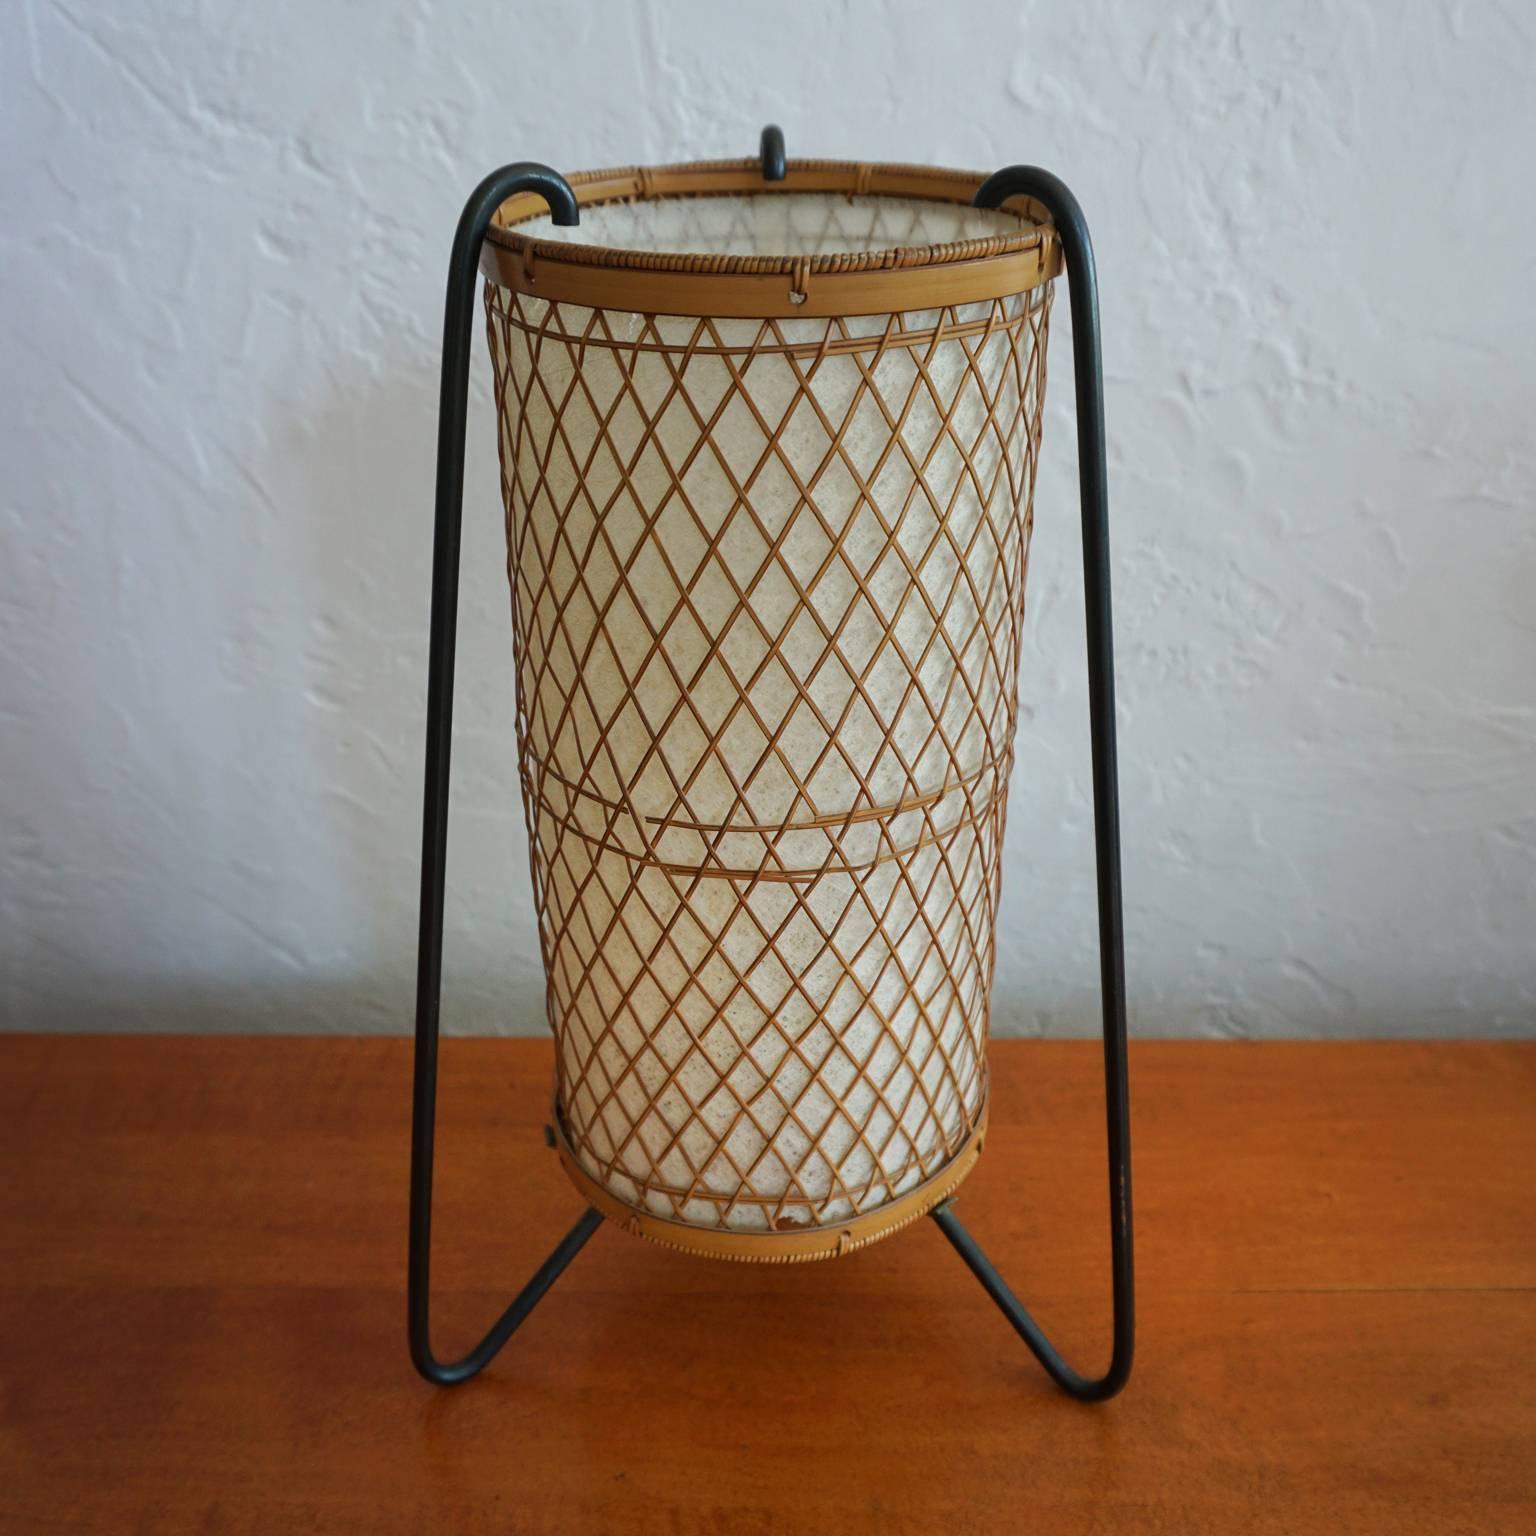 A delicately designed iron and cane lamp from Japan. The cane work is incredible and undamaged.